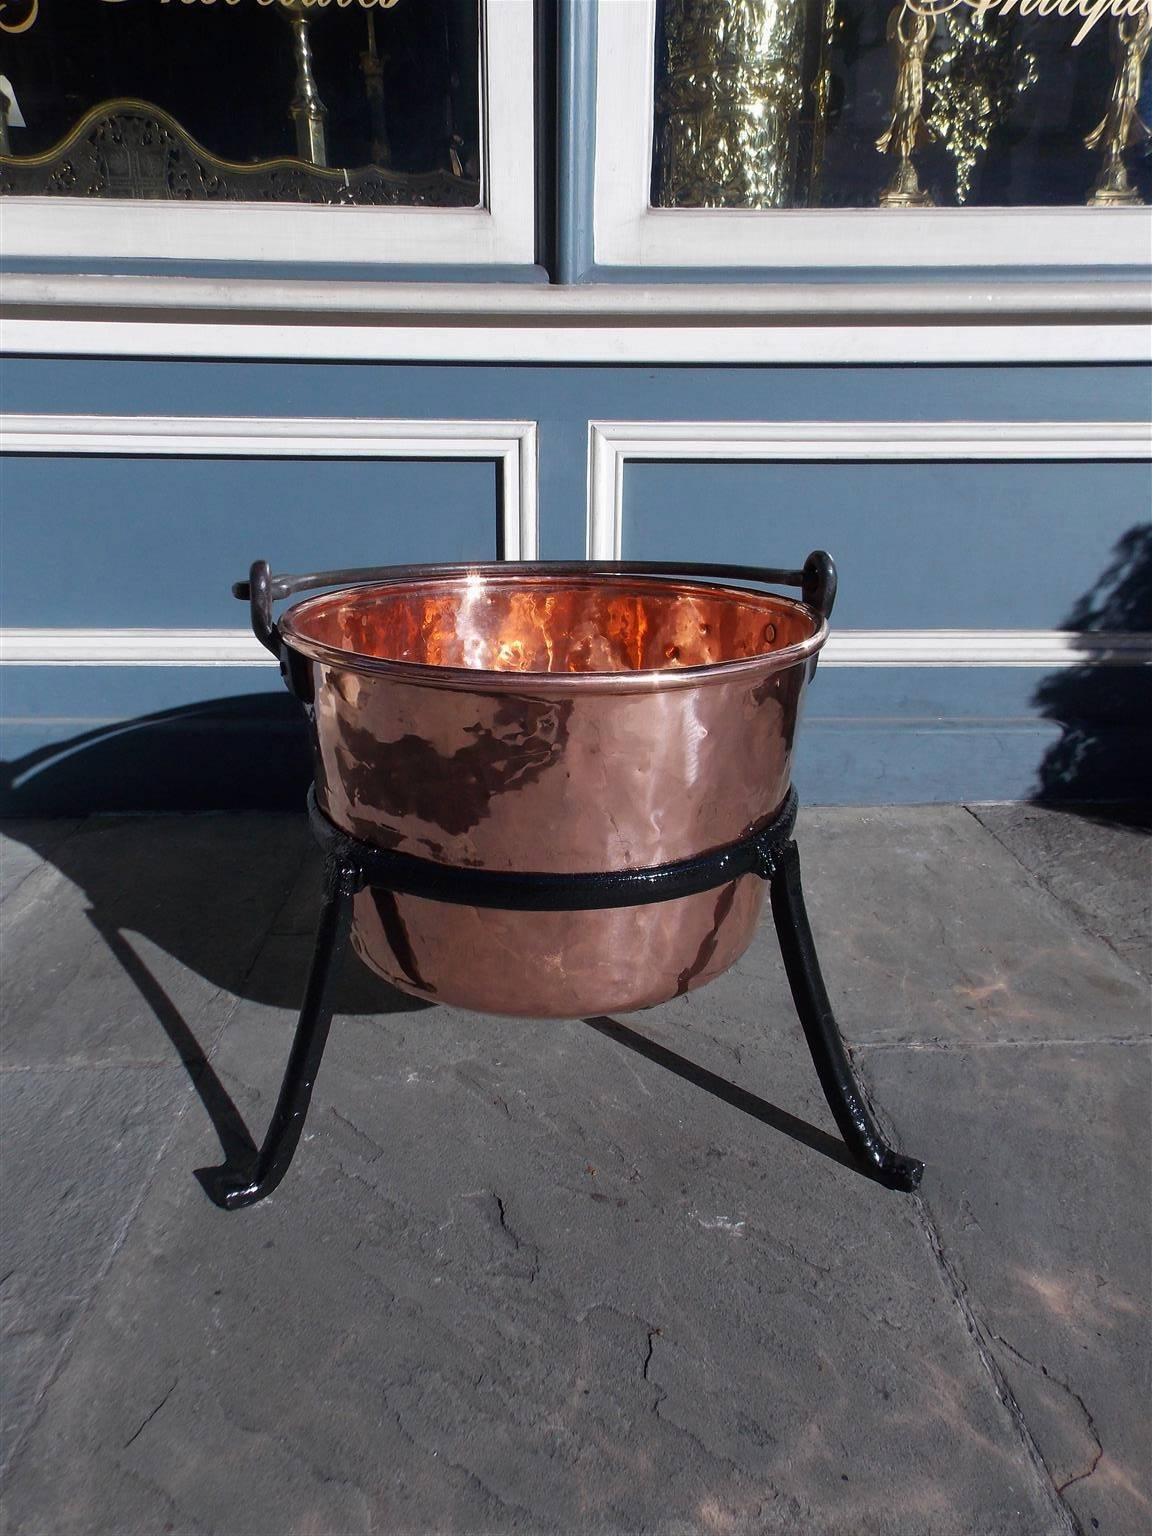 American copper and wrought iron plantation cauldron with original iron folding handle and supported by circular fitted three leg stand with stylized splayed feet. Late 18th Century. Cauldron is 36